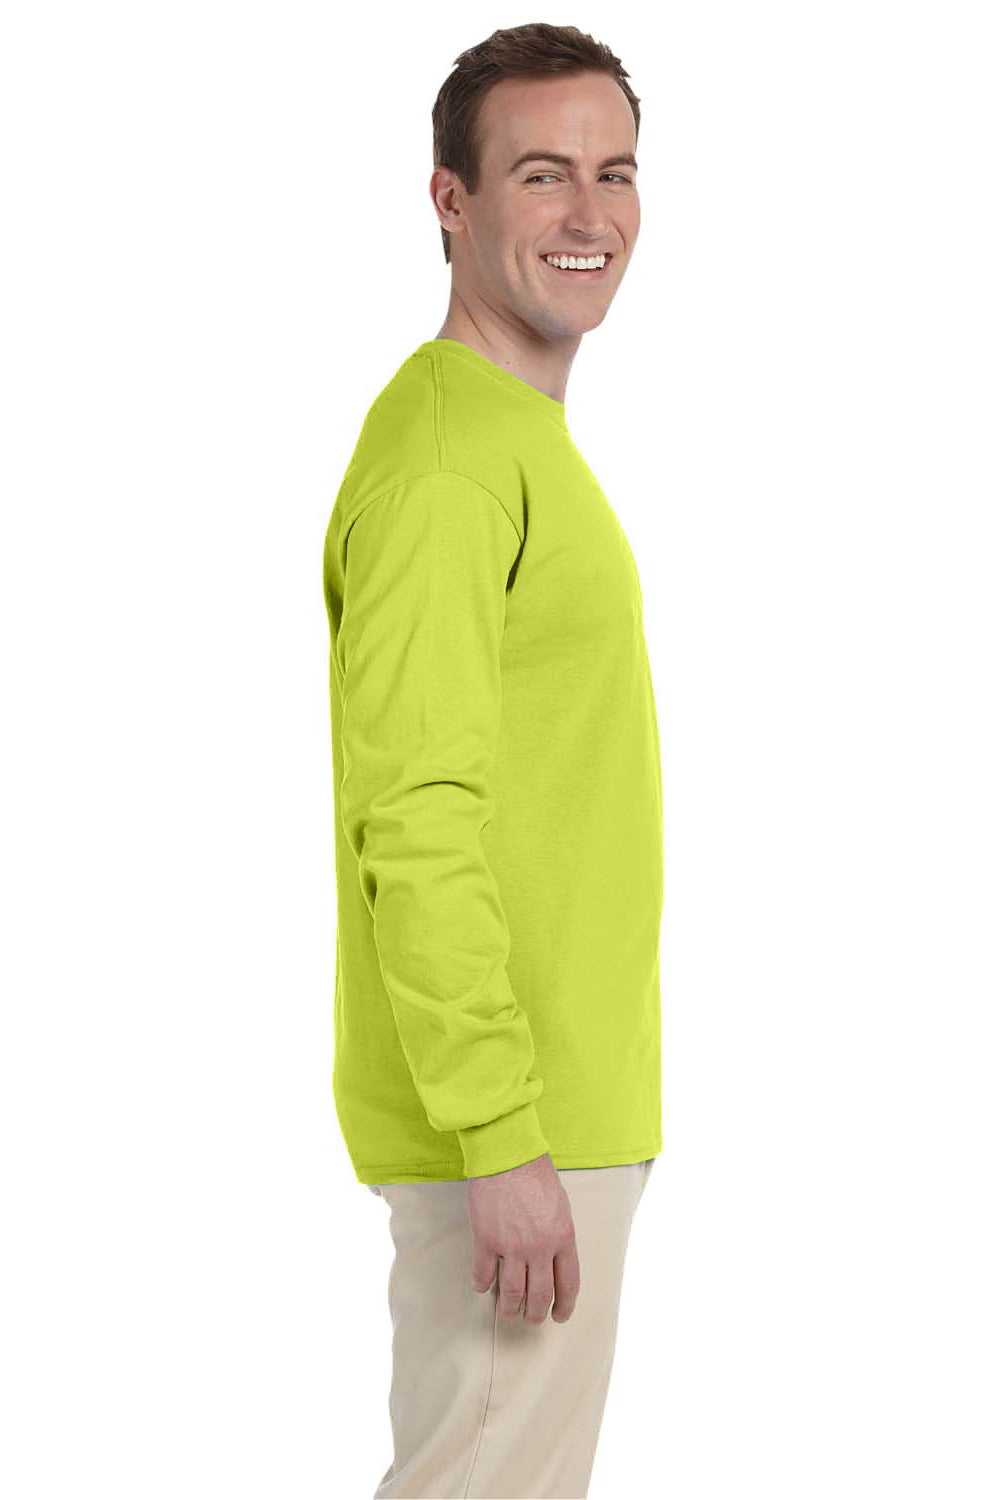 Fruit Of The Loom 4930 Mens HD Jersey Long Sleeve Crewneck T-Shirt Safety Green Side